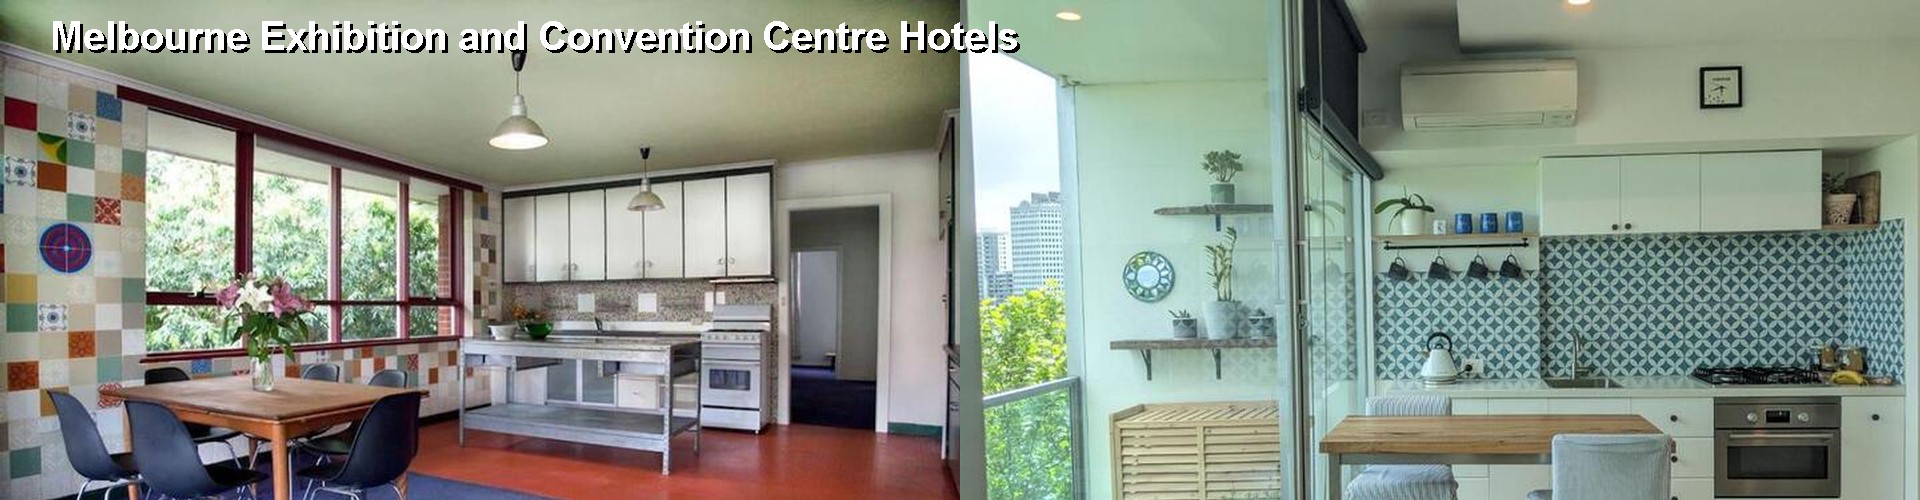 5 Best Hotels near Melbourne Exhibition and Convention Centre